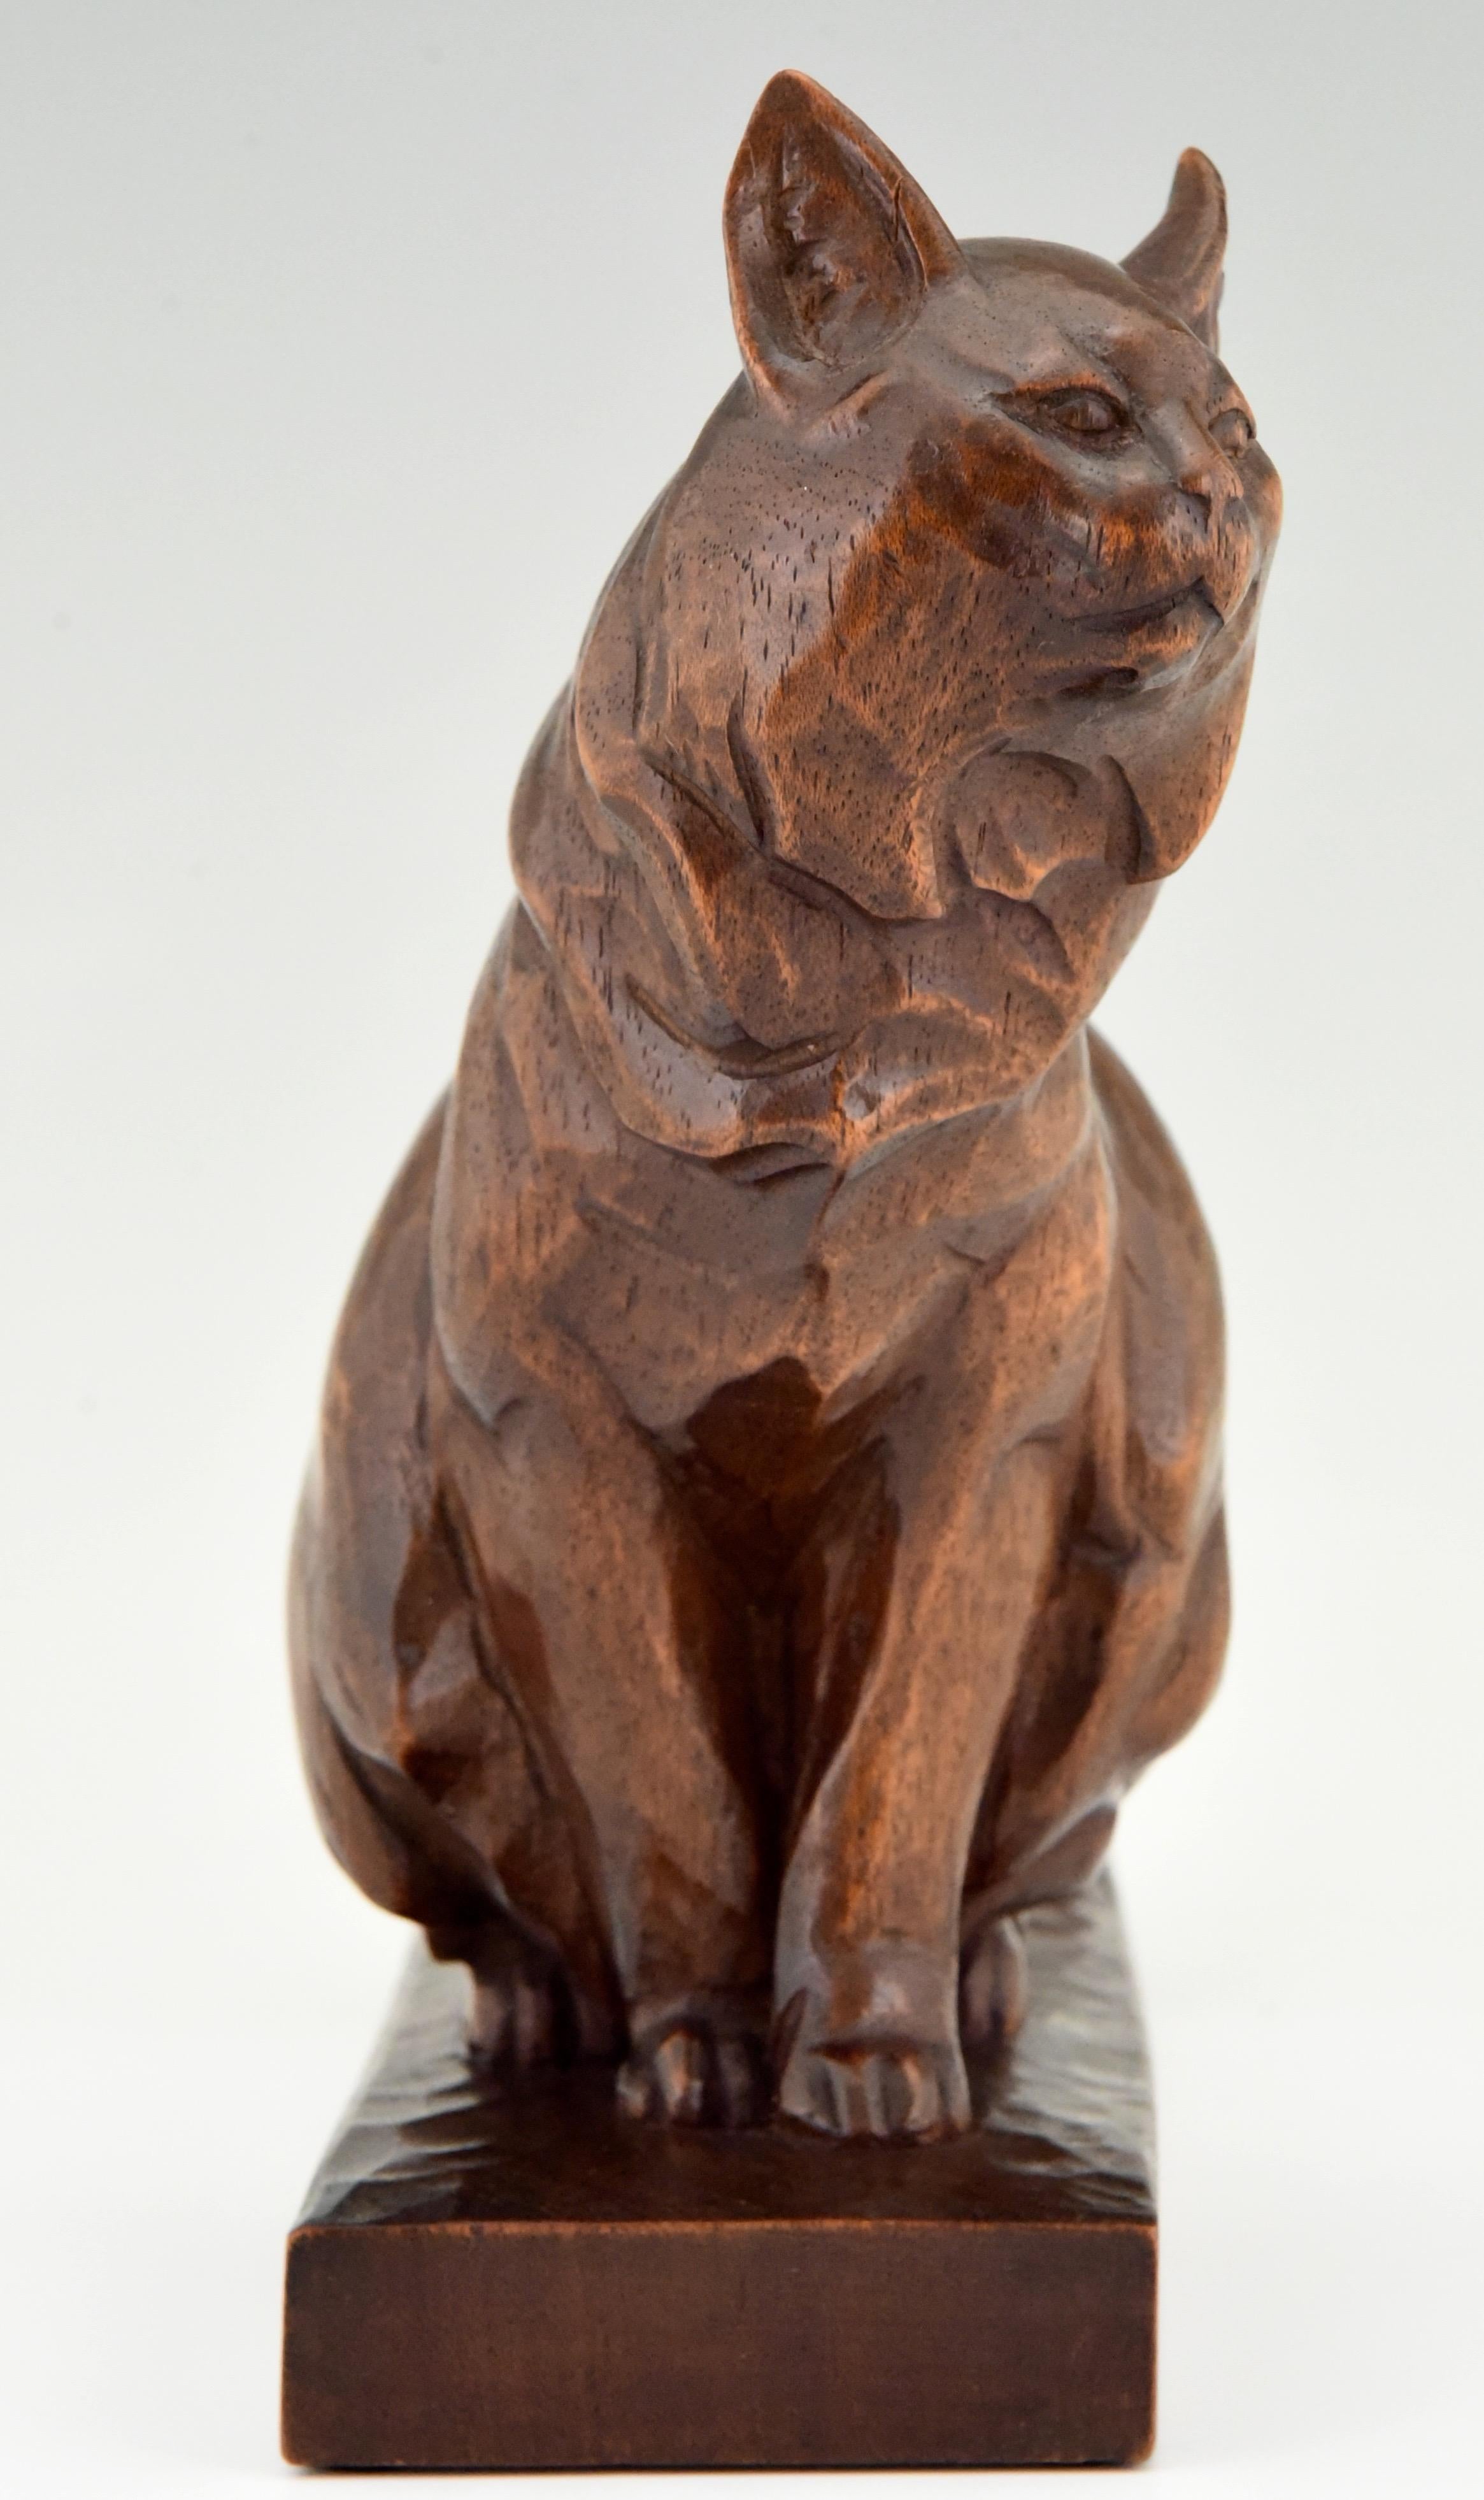 Hand-Carved Art Deco Wooden Sculpture of a Cat Hand Carved Irenee Rochard, France, 1930